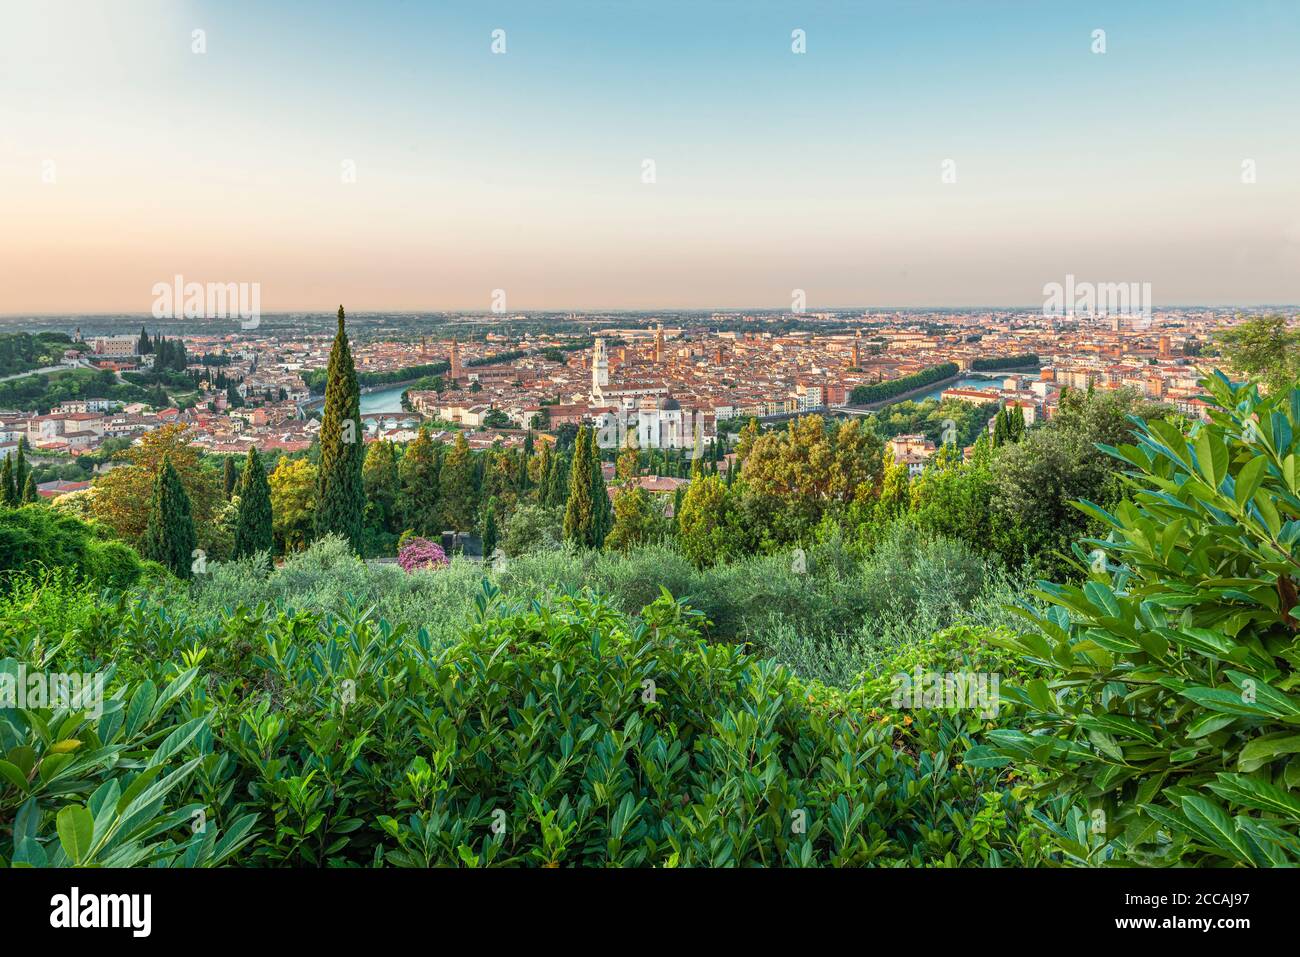 View over green bushes at the Sanctuary of Our Lady of Lourdes on the sunrise over the old town of Verona, Italy Stock Photo